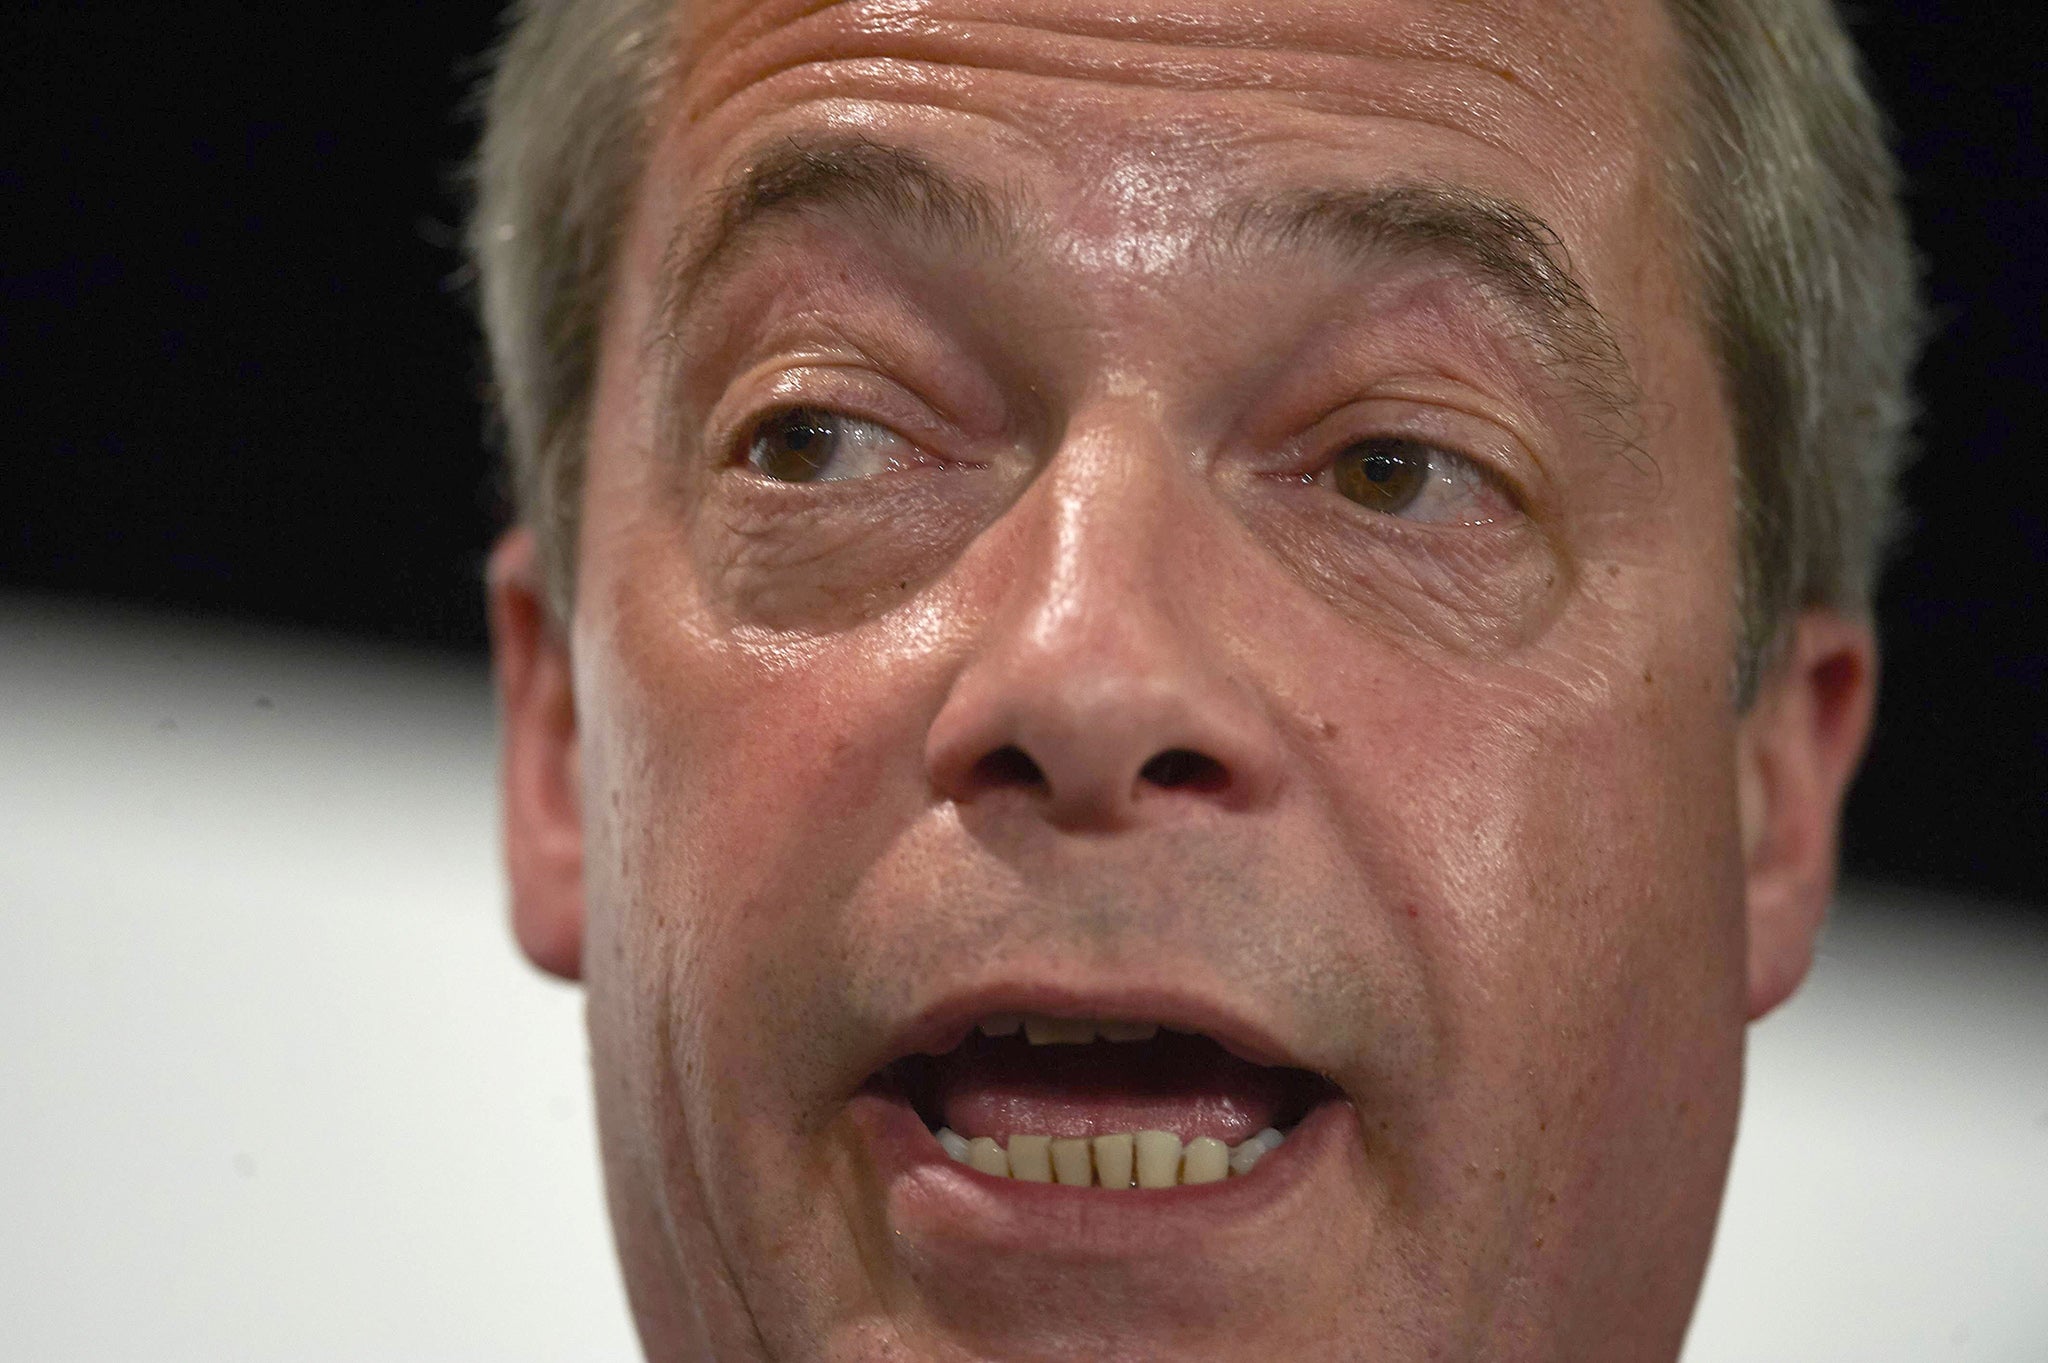 Nigel Farage conceded defeat in the South Thanet poll